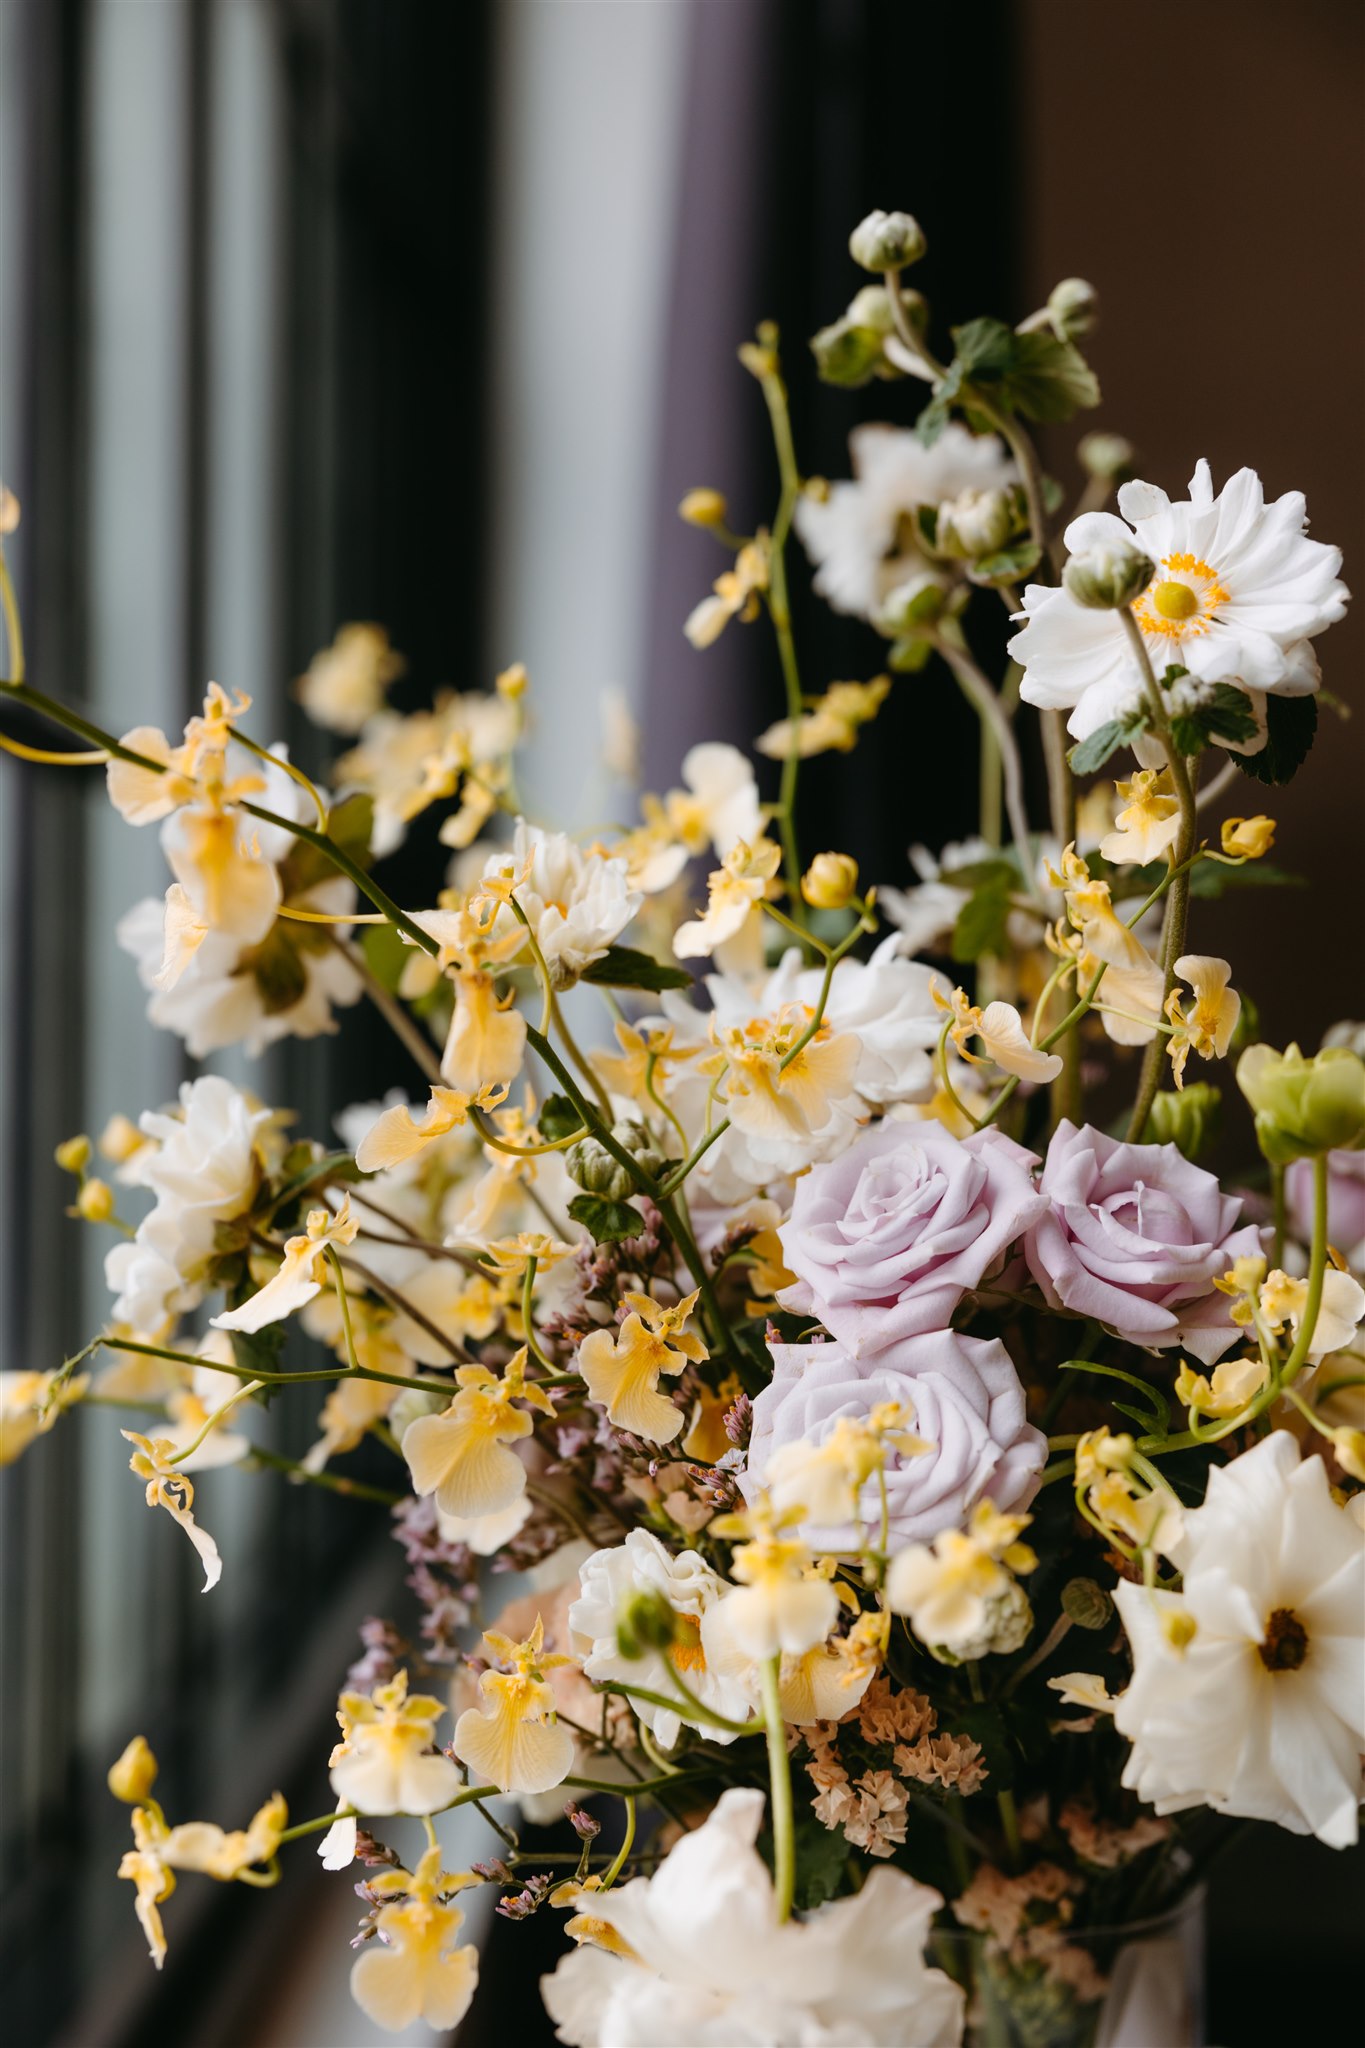 A vibrant floral arrangement featuring pale purple roses, yellow orchids, and white daisies set against a softly blurred background.